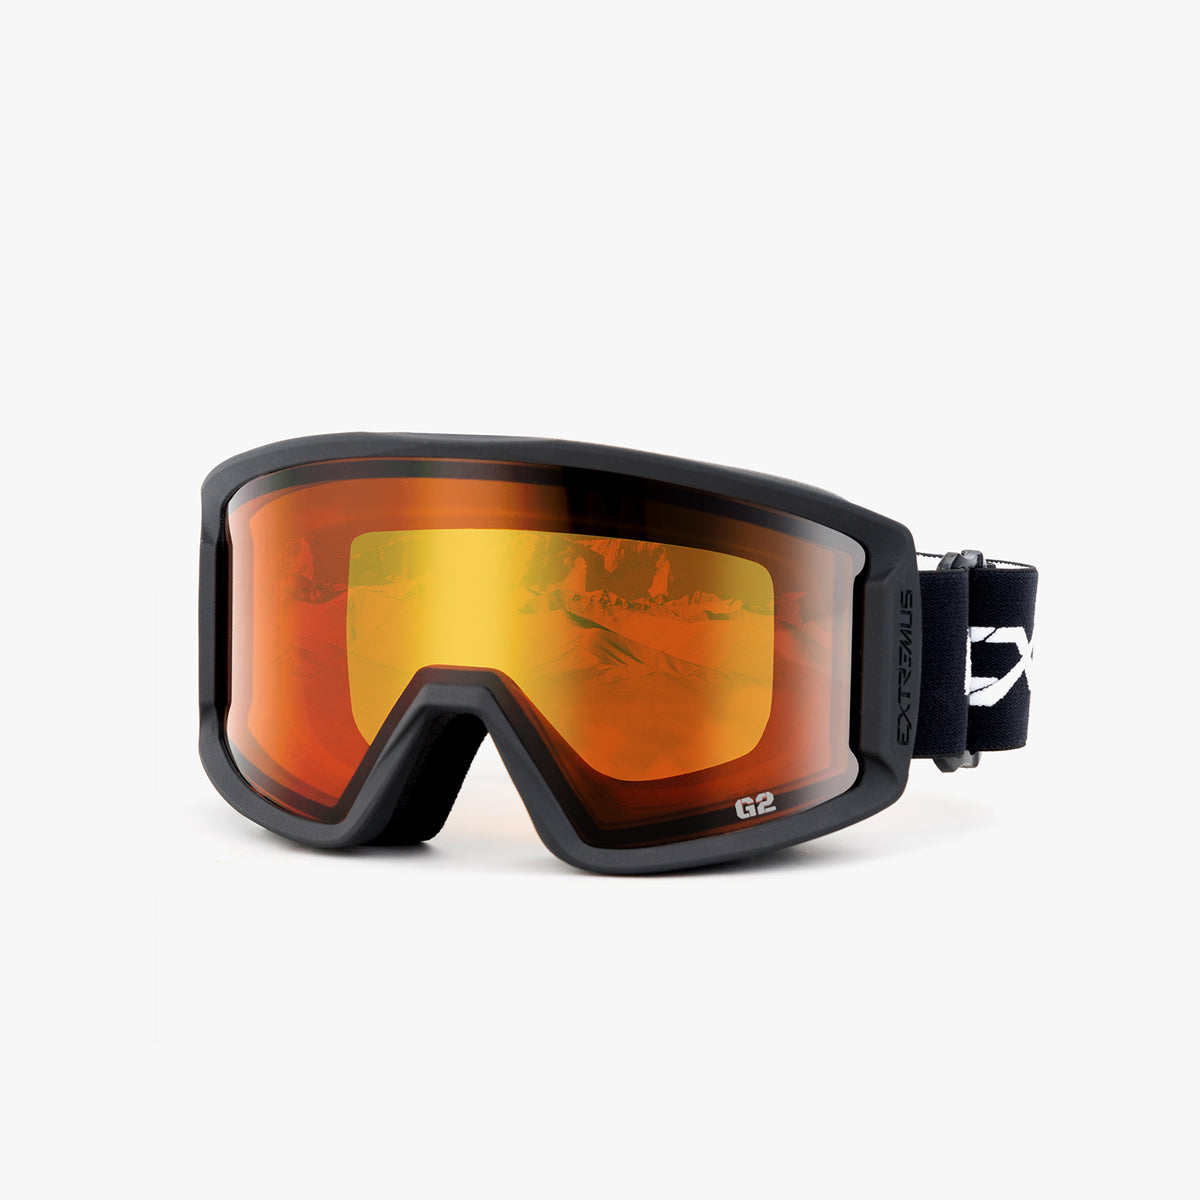 Extremus Anti-Fog Cylindrical Lens Goggles with UV400 Sun Protection